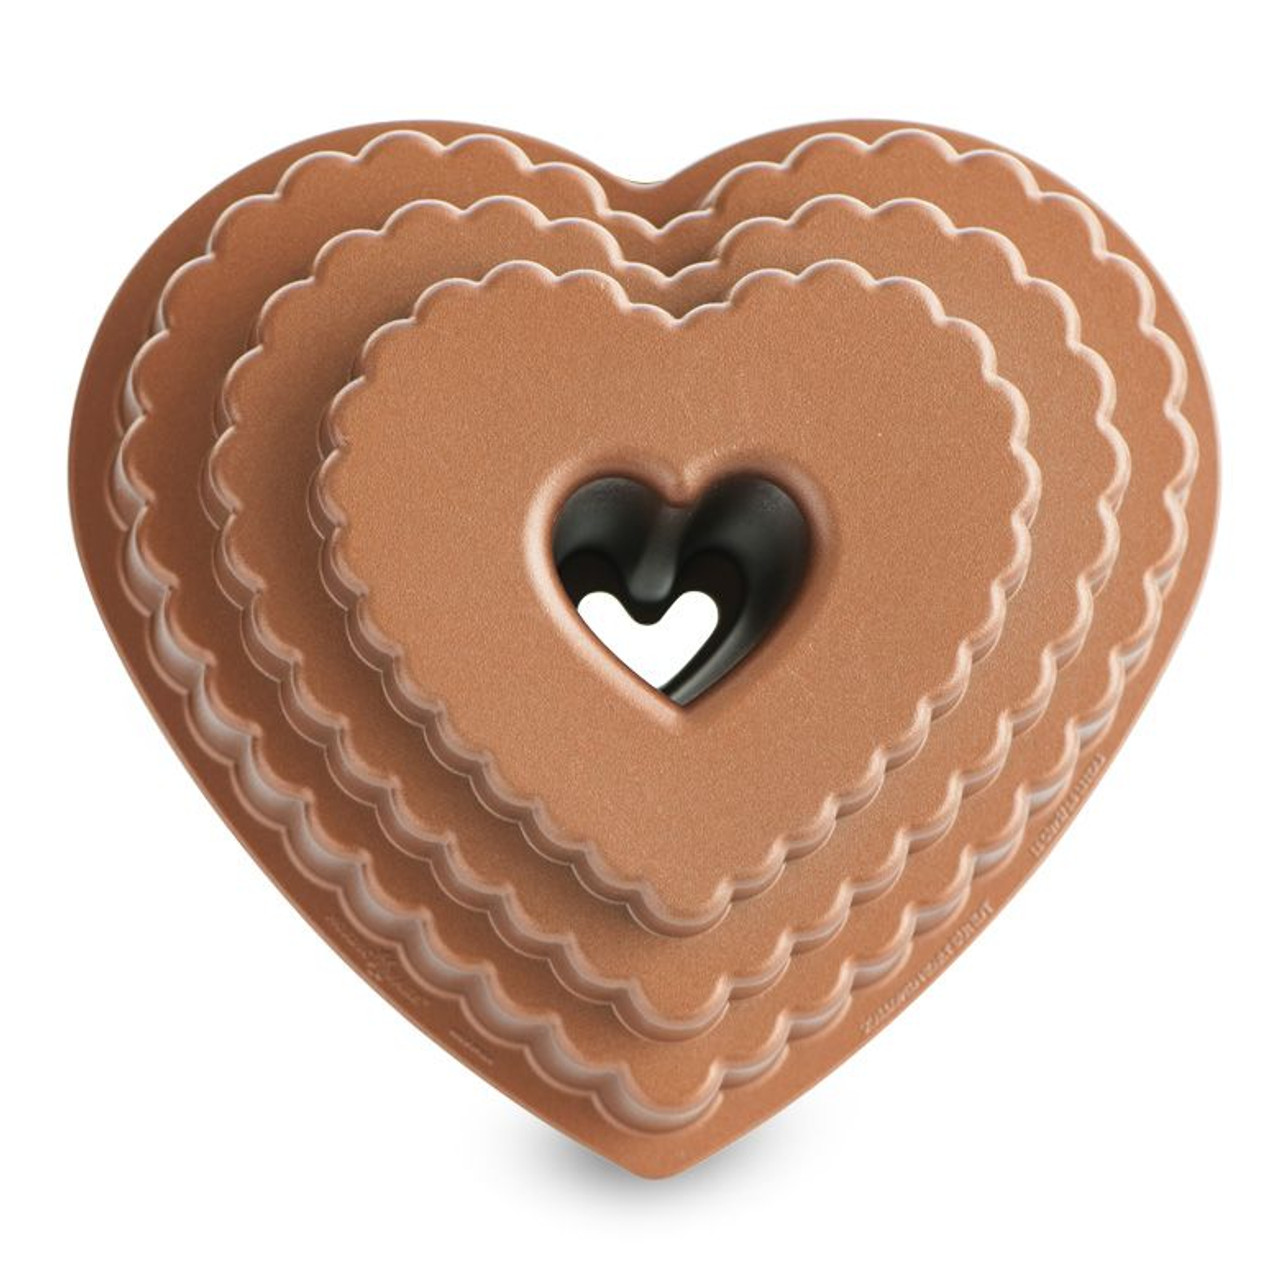 https://cdn11.bigcommerce.com/s-hccytny0od/images/stencil/1280x1280/products/741/3930/nordic-ware-tiered-heart-bundt-pan__03944.1583507143.jpg?c=2?imbypass=on